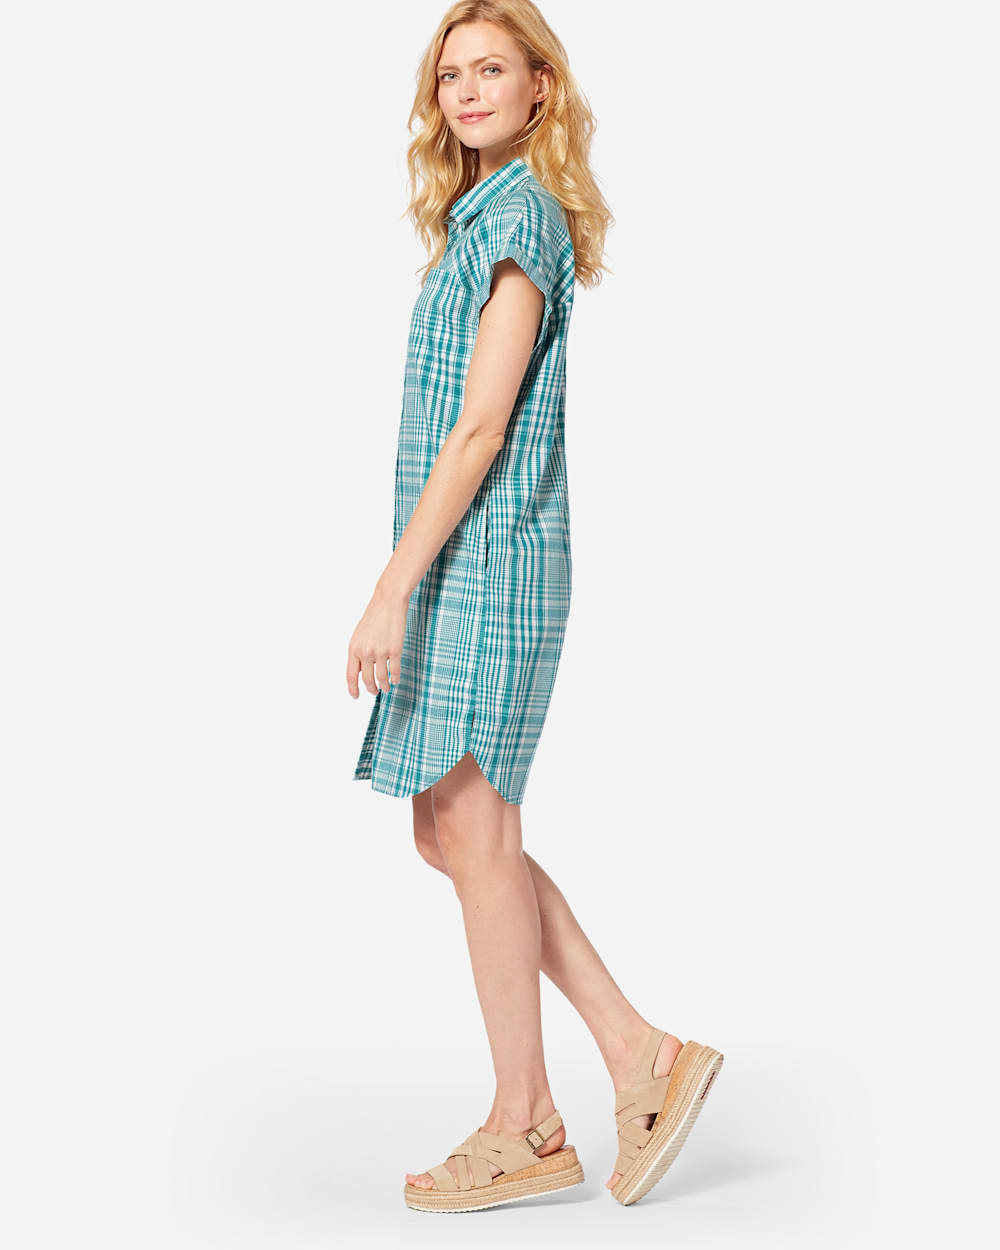 ADDITIONAL VIEW OF SUNNYSIDE TWO POCKET SHIRT DRESS IN TEAL image number 2